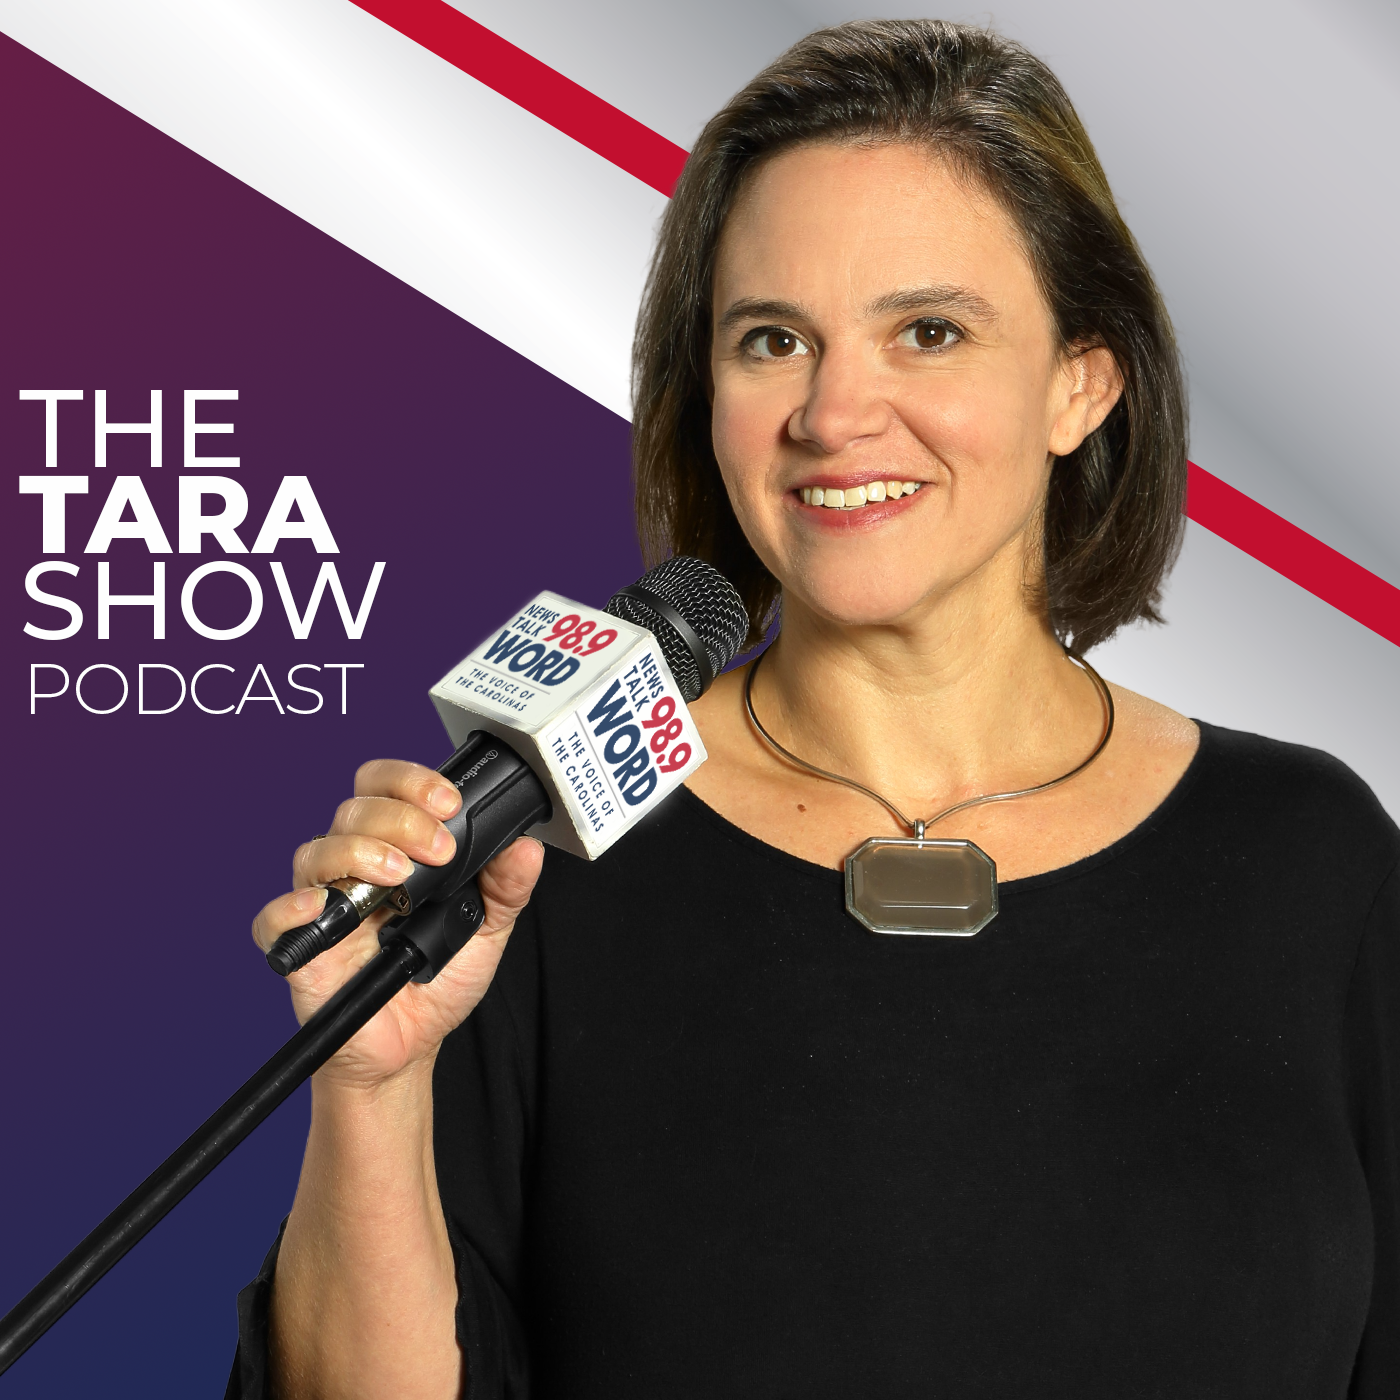 Hour 3: The Tara Show - “Losing the Republic” “Getting into more Wars” The Radical Hatred for Jews on the Left” “Morons from Asheville” 